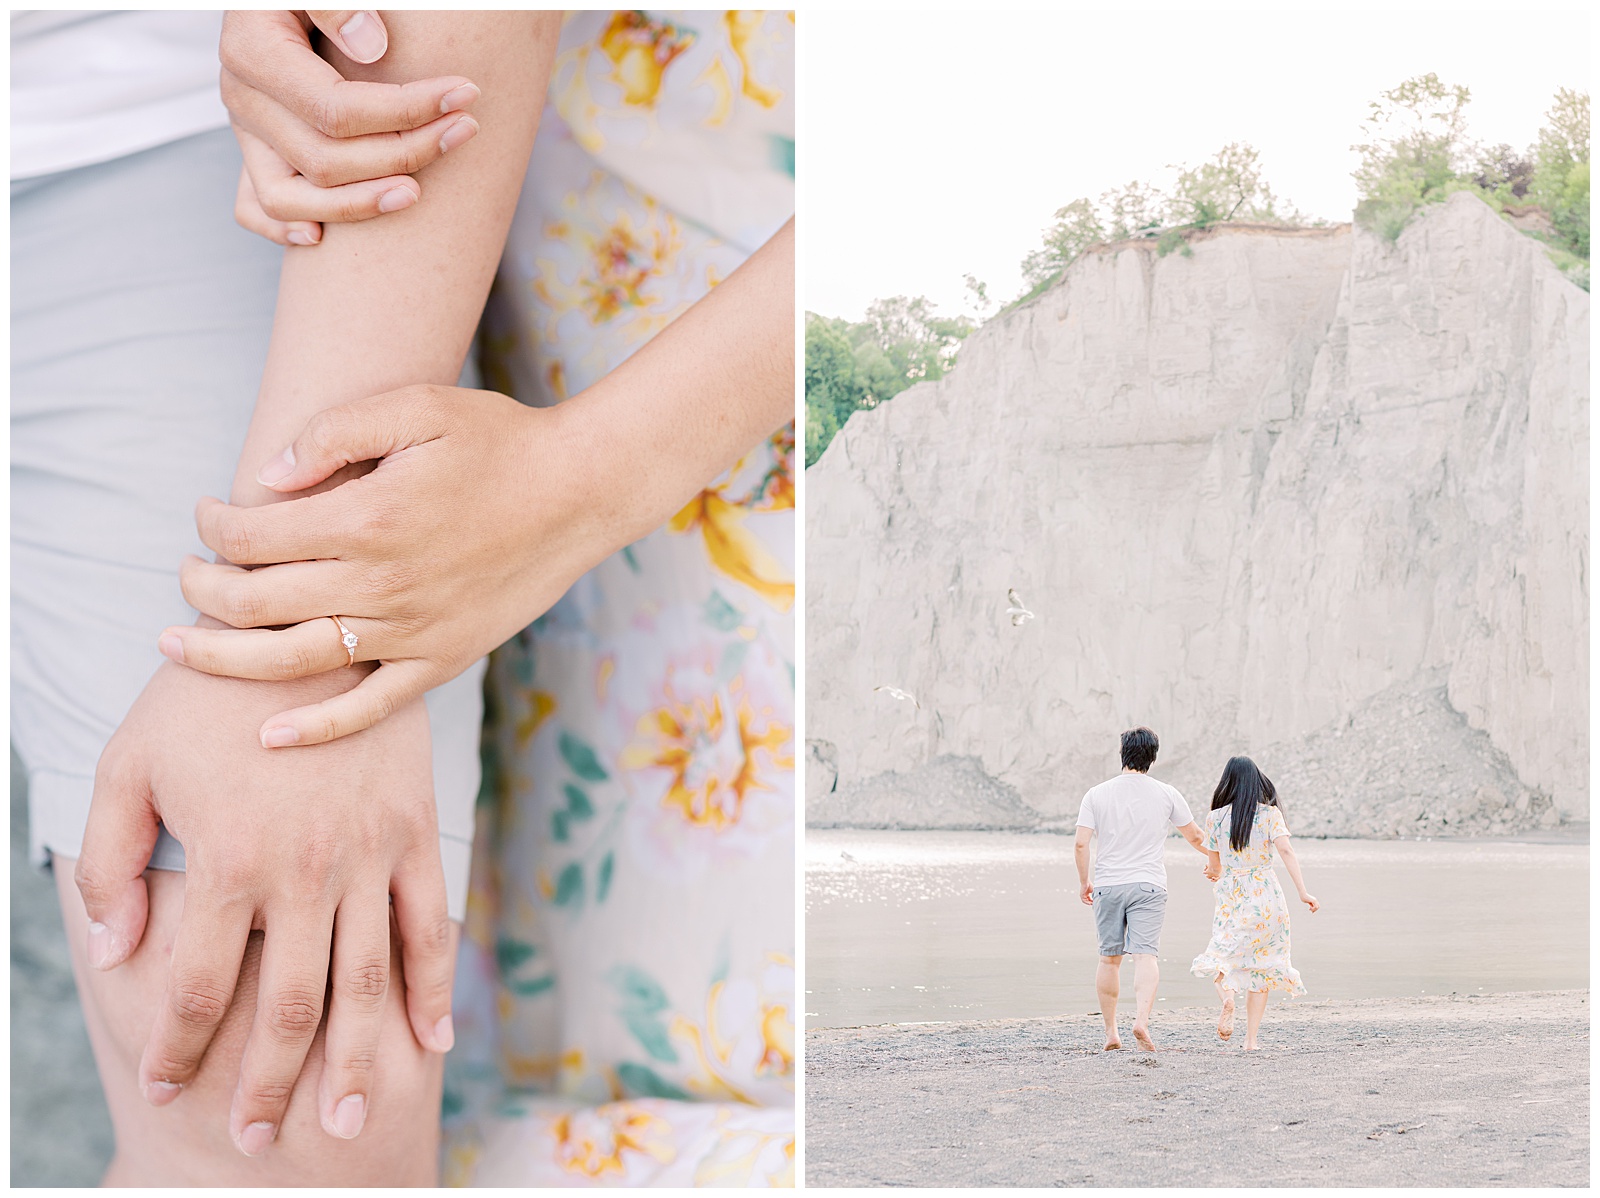 Couple running at Scarborough Bluffs, engagement ring